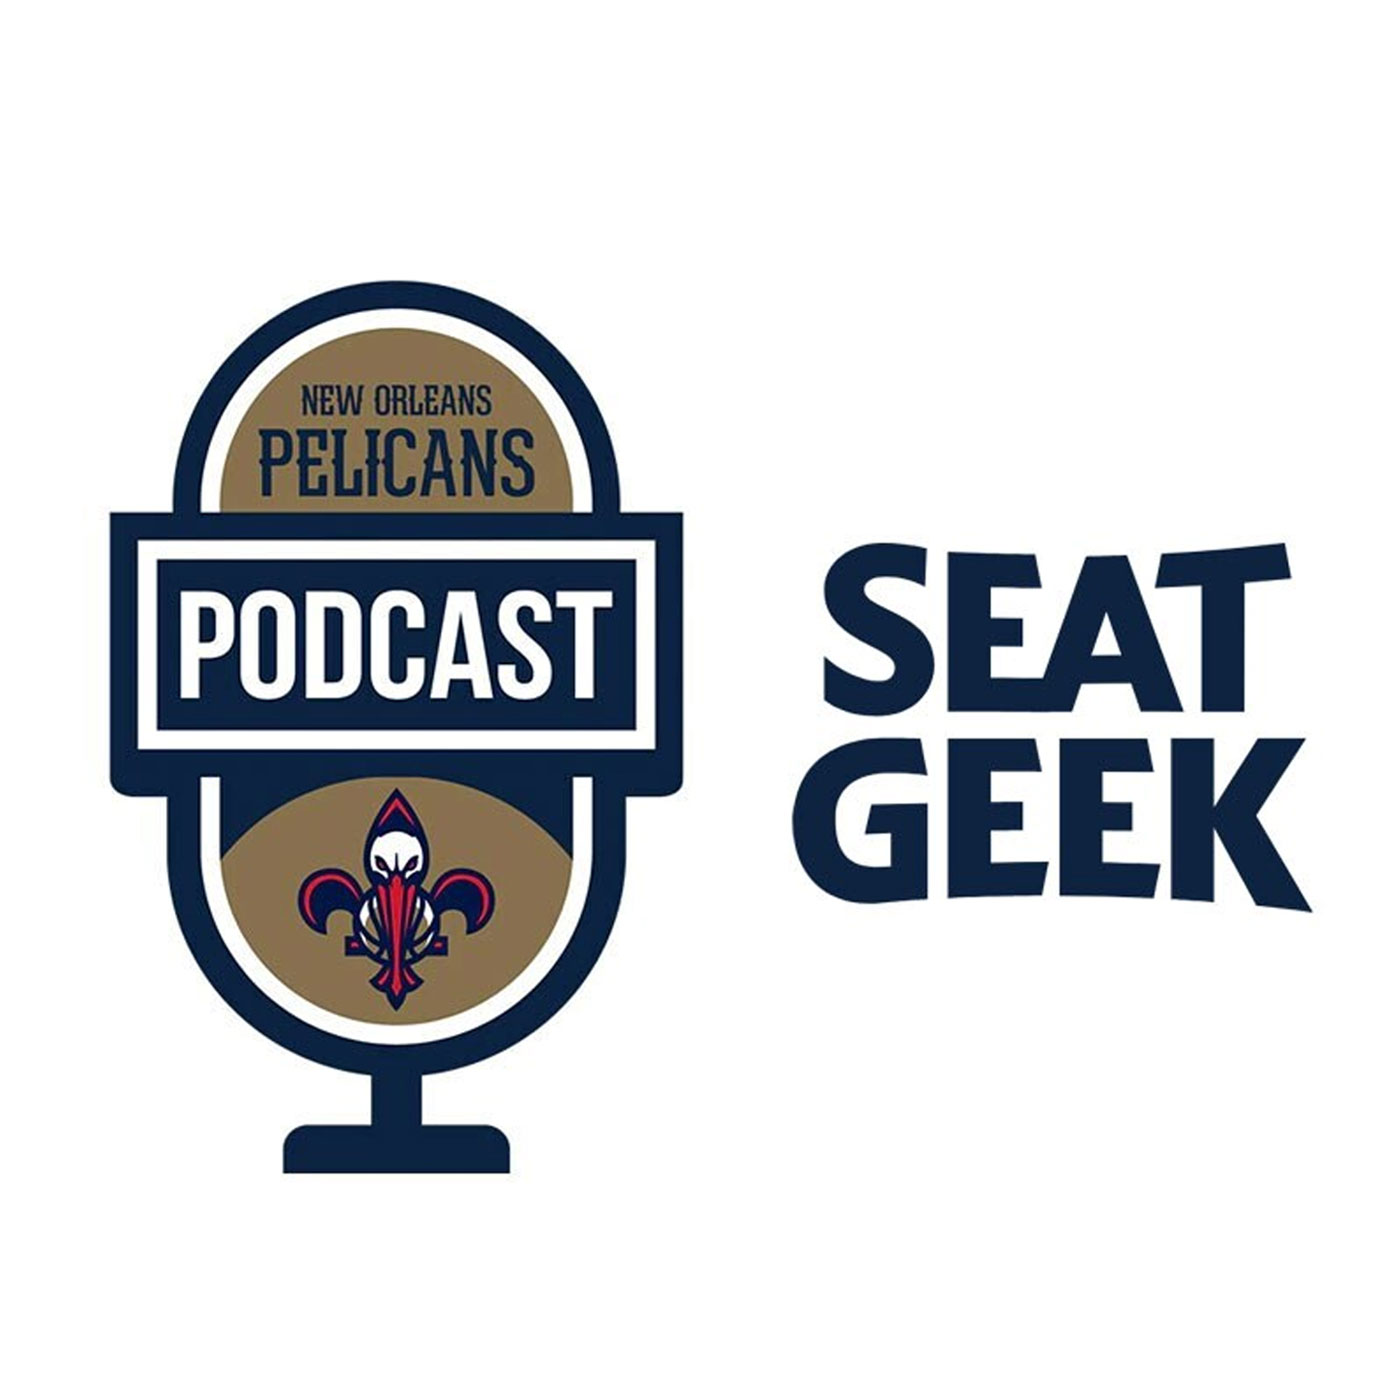 Reporter round table on the New Orleans Pelicans podcast presented by SeatGeek - April 16, 2021